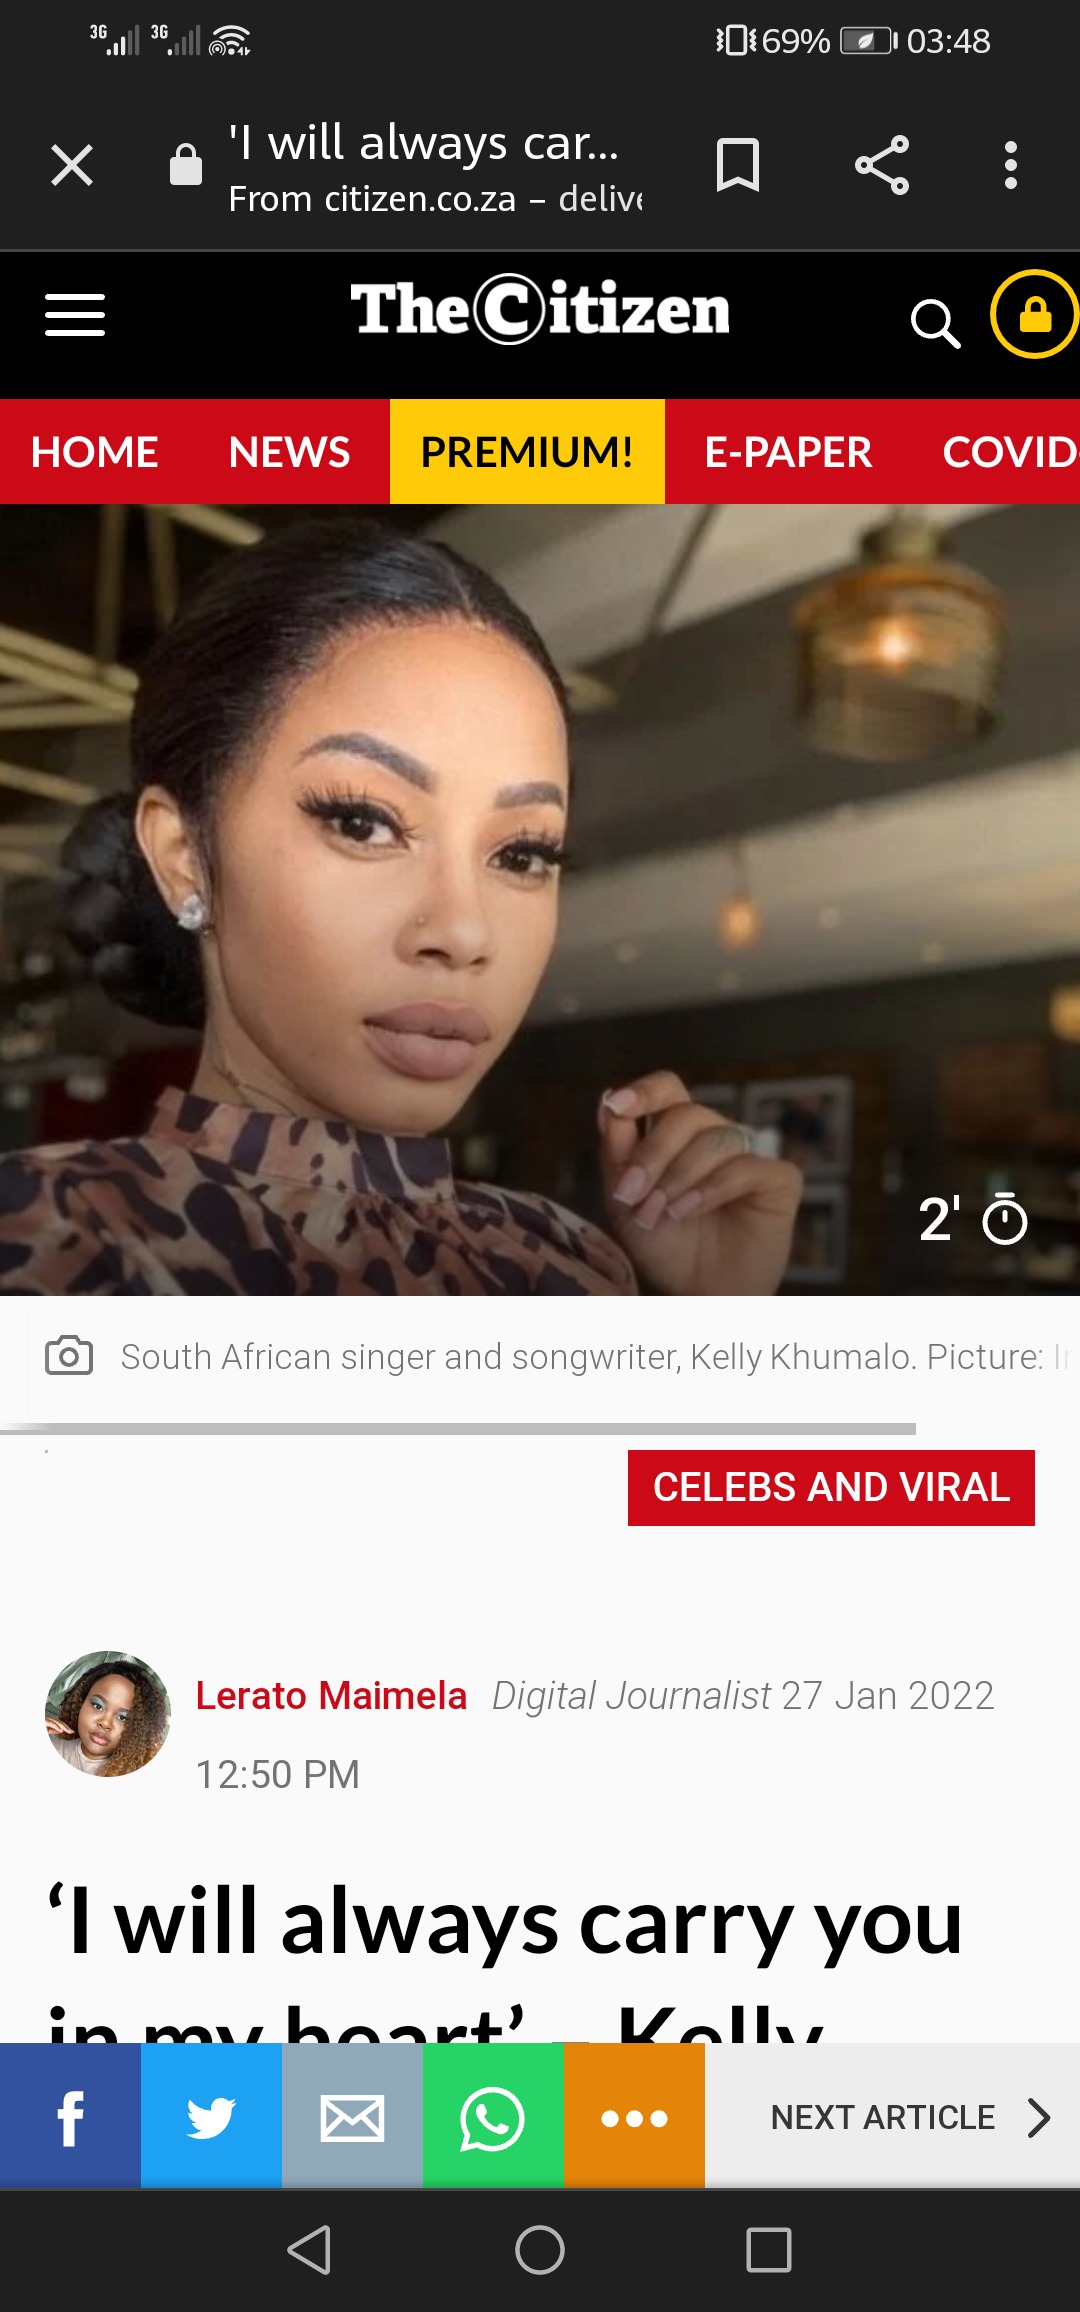 Condolence messages are pouring in for Kelly Khumalo. Crying 4